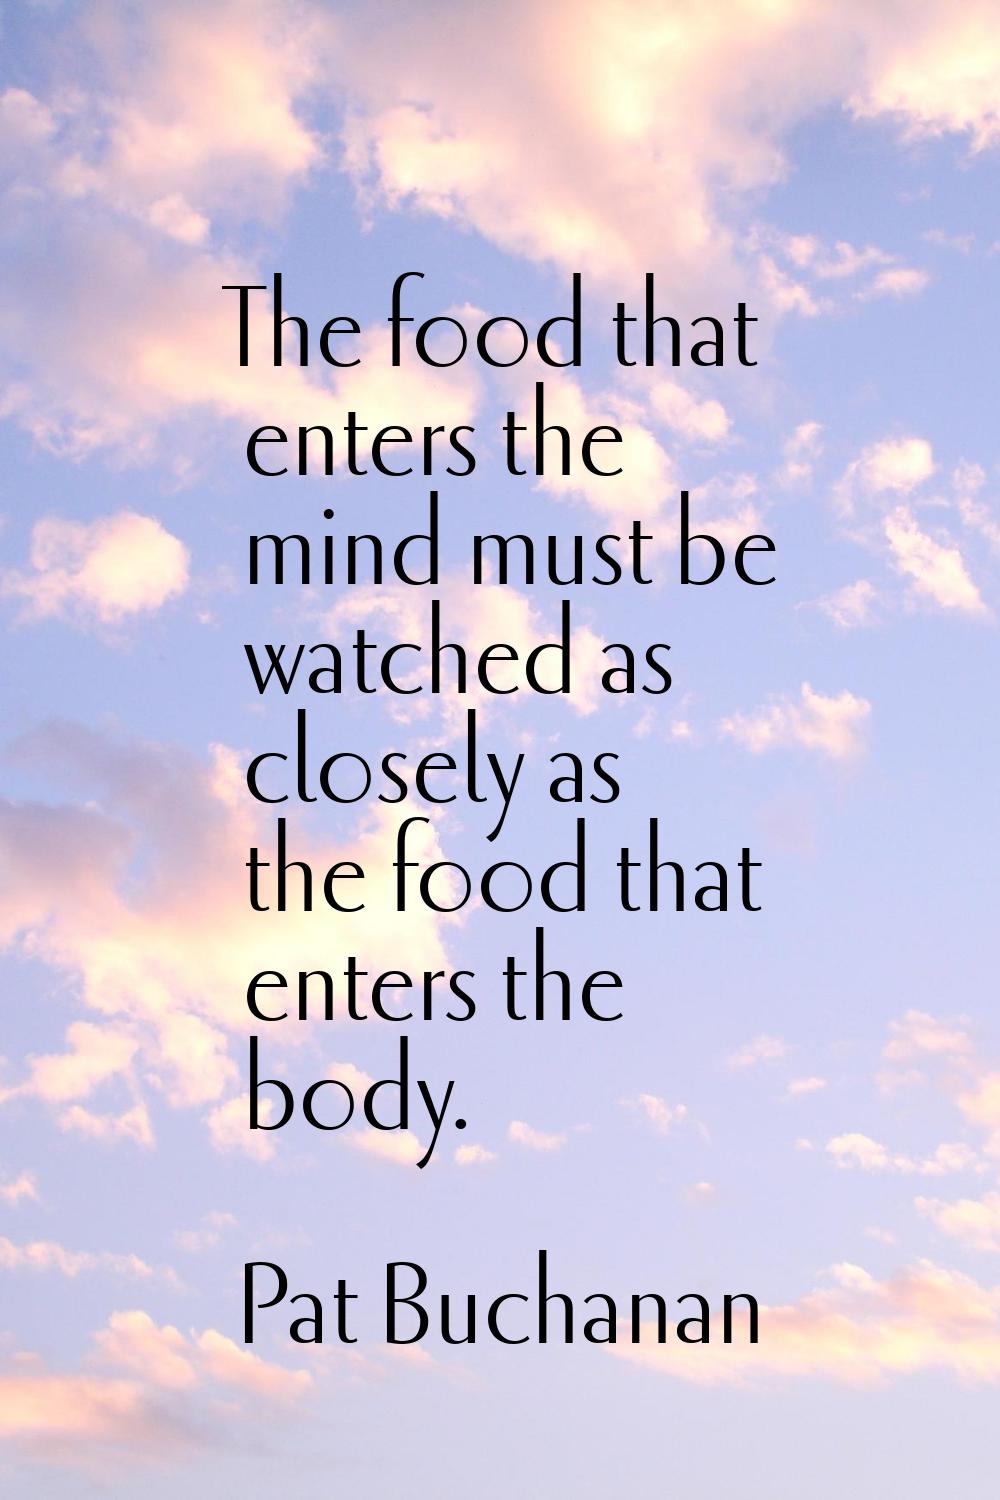 The food that enters the mind must be watched as closely as the food that enters the body.